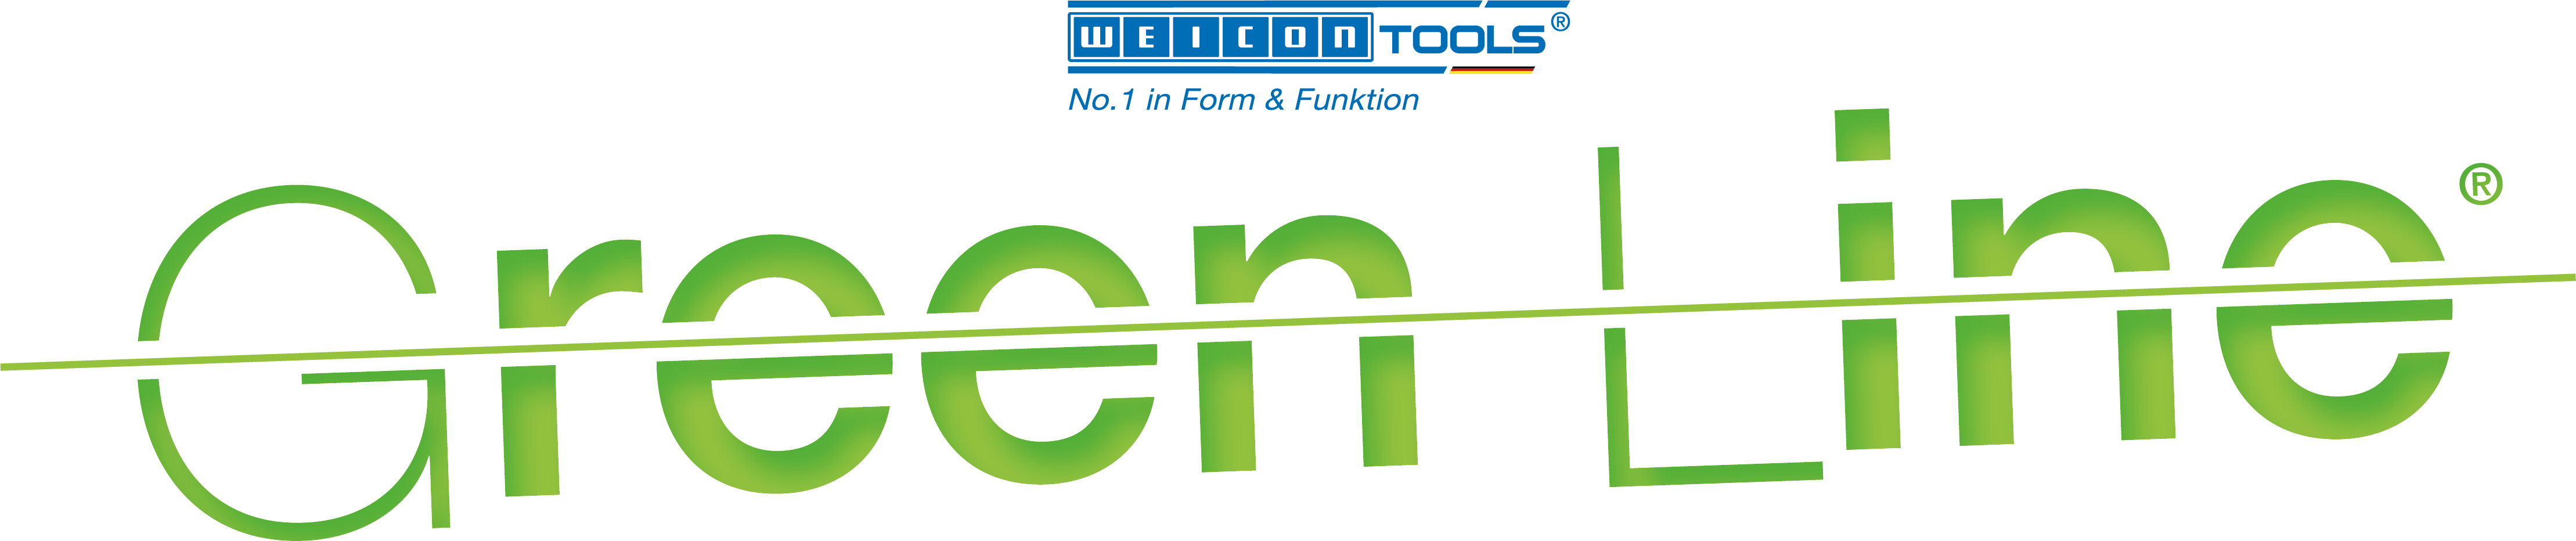 Logo_WEICON_TOOLS_GreenLine.png